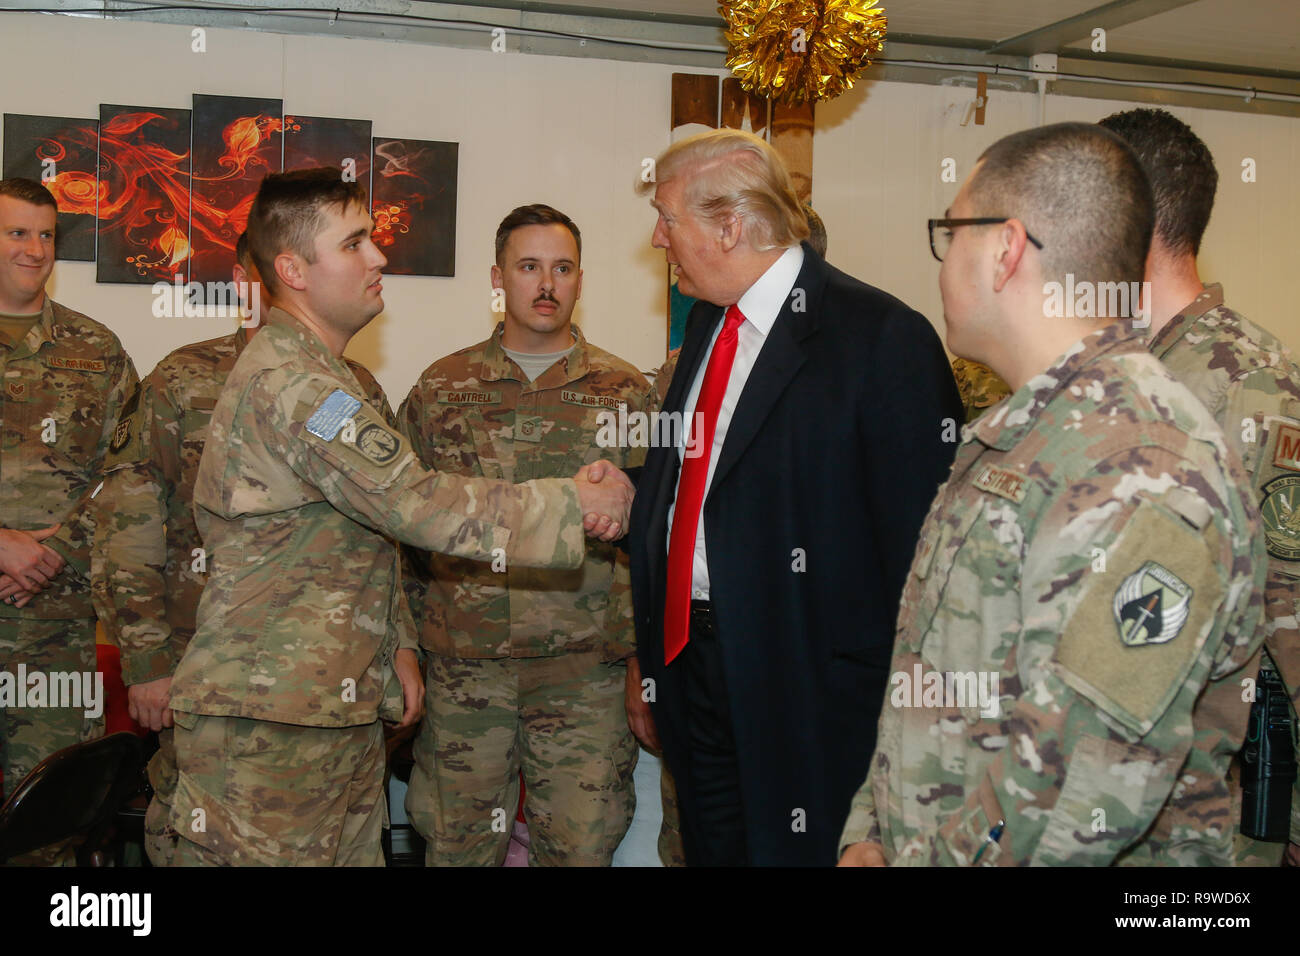 U.S. President Donald Trump greets U.S. service members during a surprise visit to al-Asad Air Base December 26, 2018 in Al Anbar, Iraq. The president and the first lady spent about three hours on Boxing Day at Al Asad, located in western Iraq, their first trip to visit troops overseas since taking office. Stock Photo